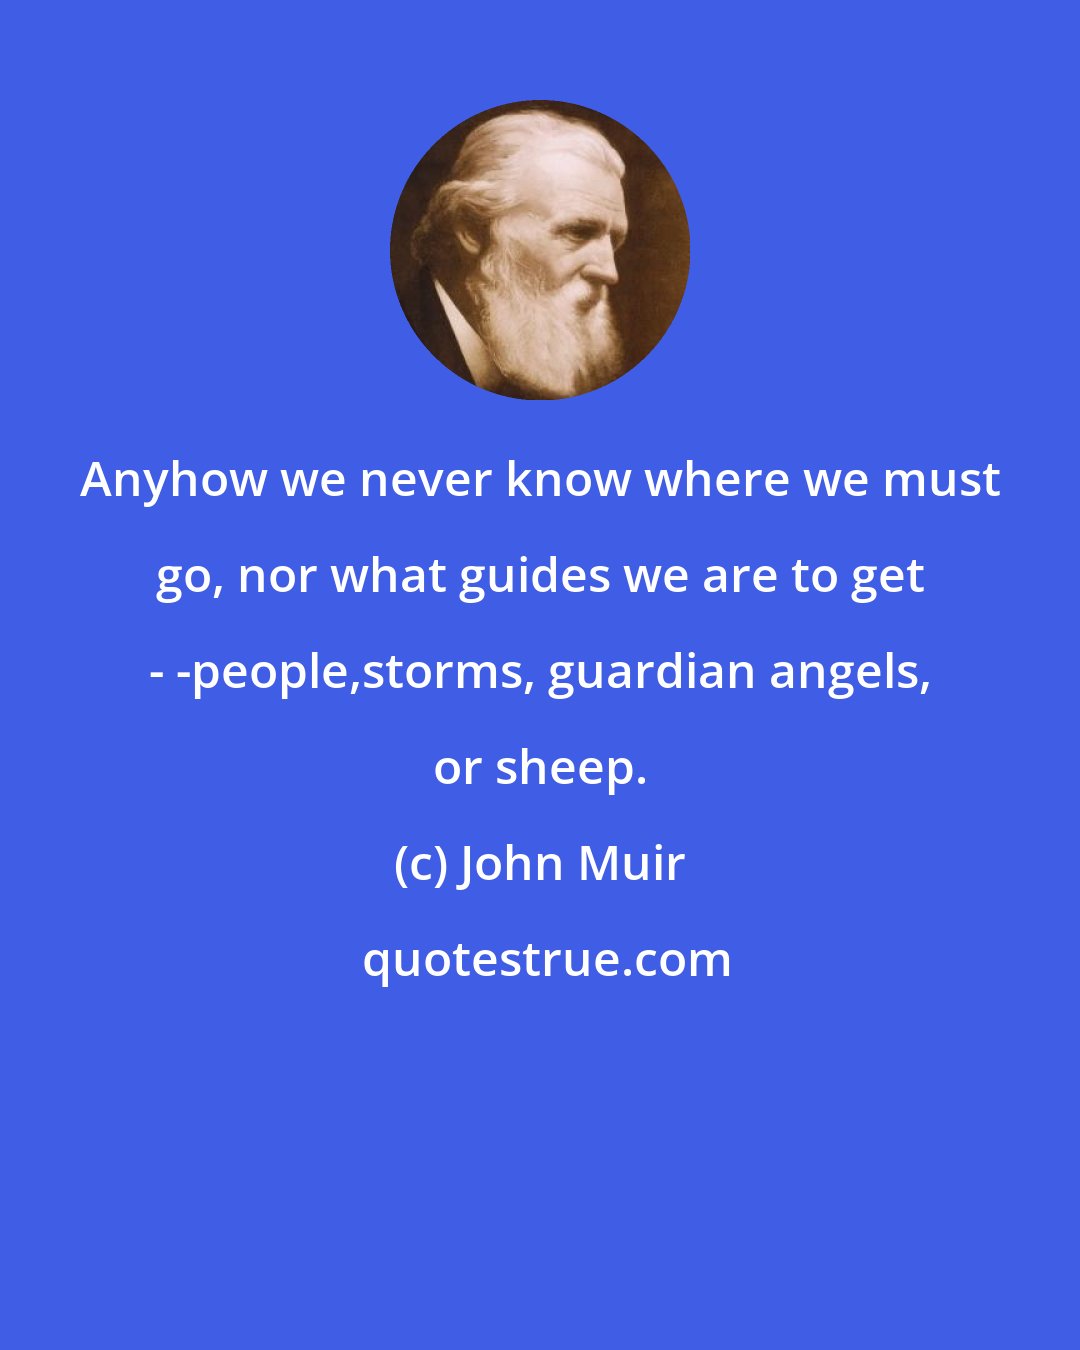 John Muir: Anyhow we never know where we must go, nor what guides we are to get - -people,storms, guardian angels, or sheep.